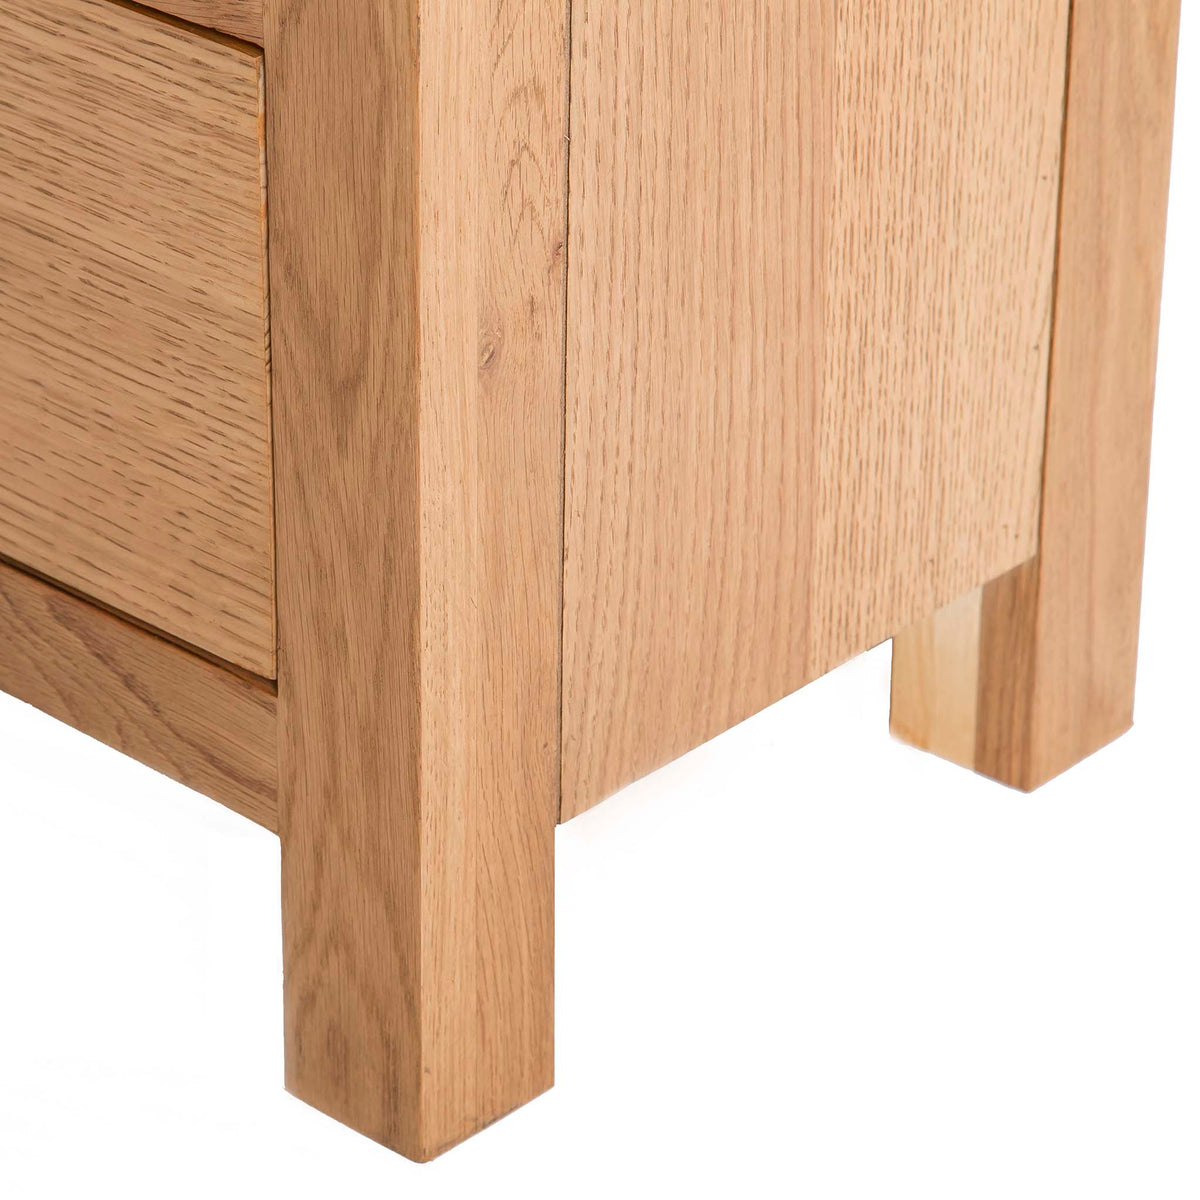 Surrey Oak 5 drawer tallboy chest of 5 drawers - Close up of  feet of tallboy